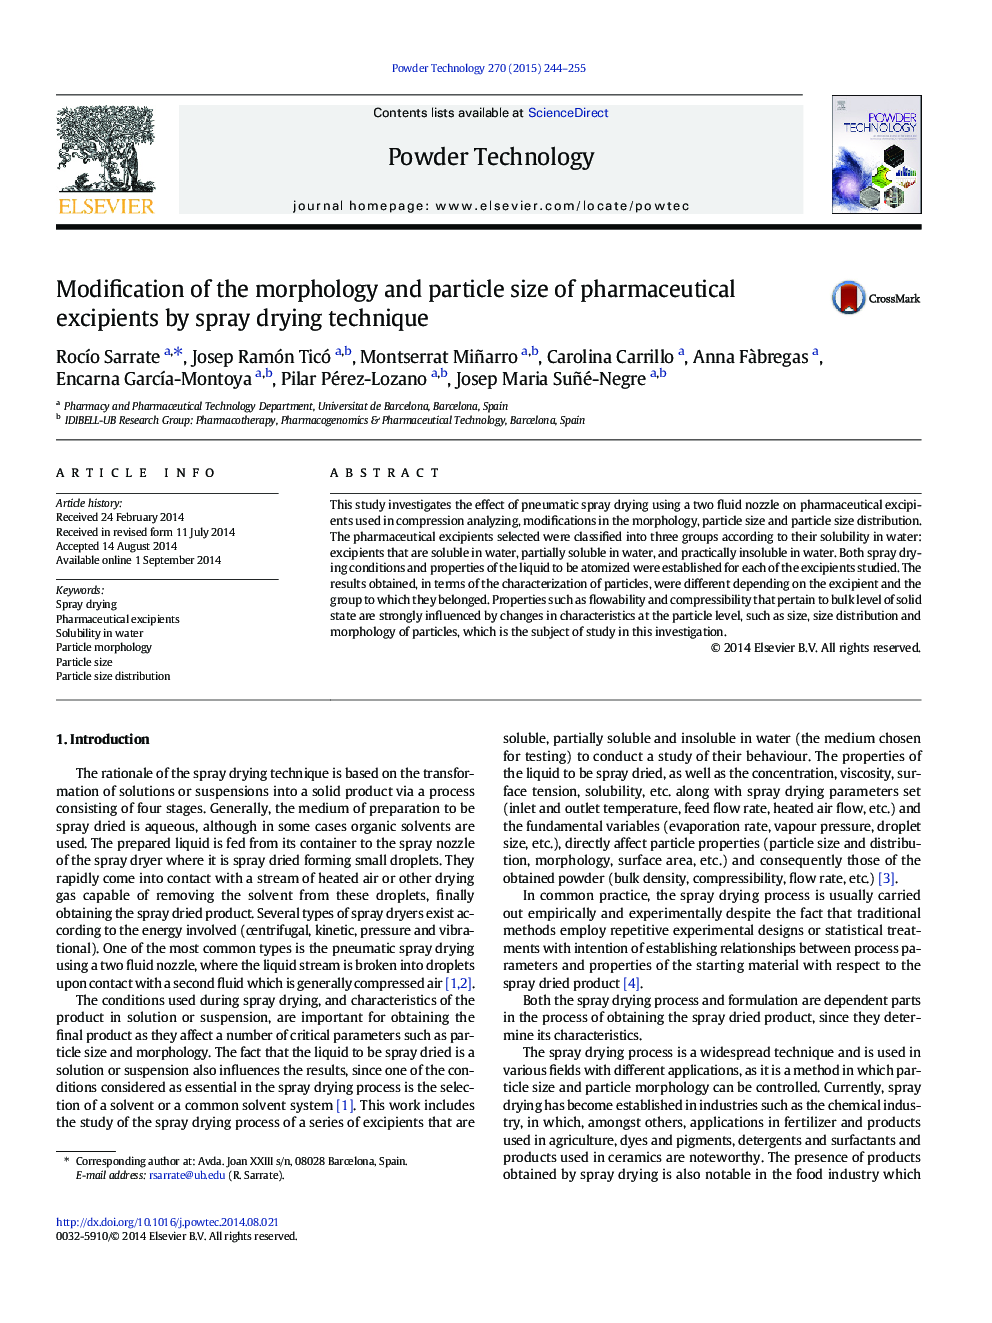 Modification of the morphology and particle size of pharmaceutical excipients by spray drying technique